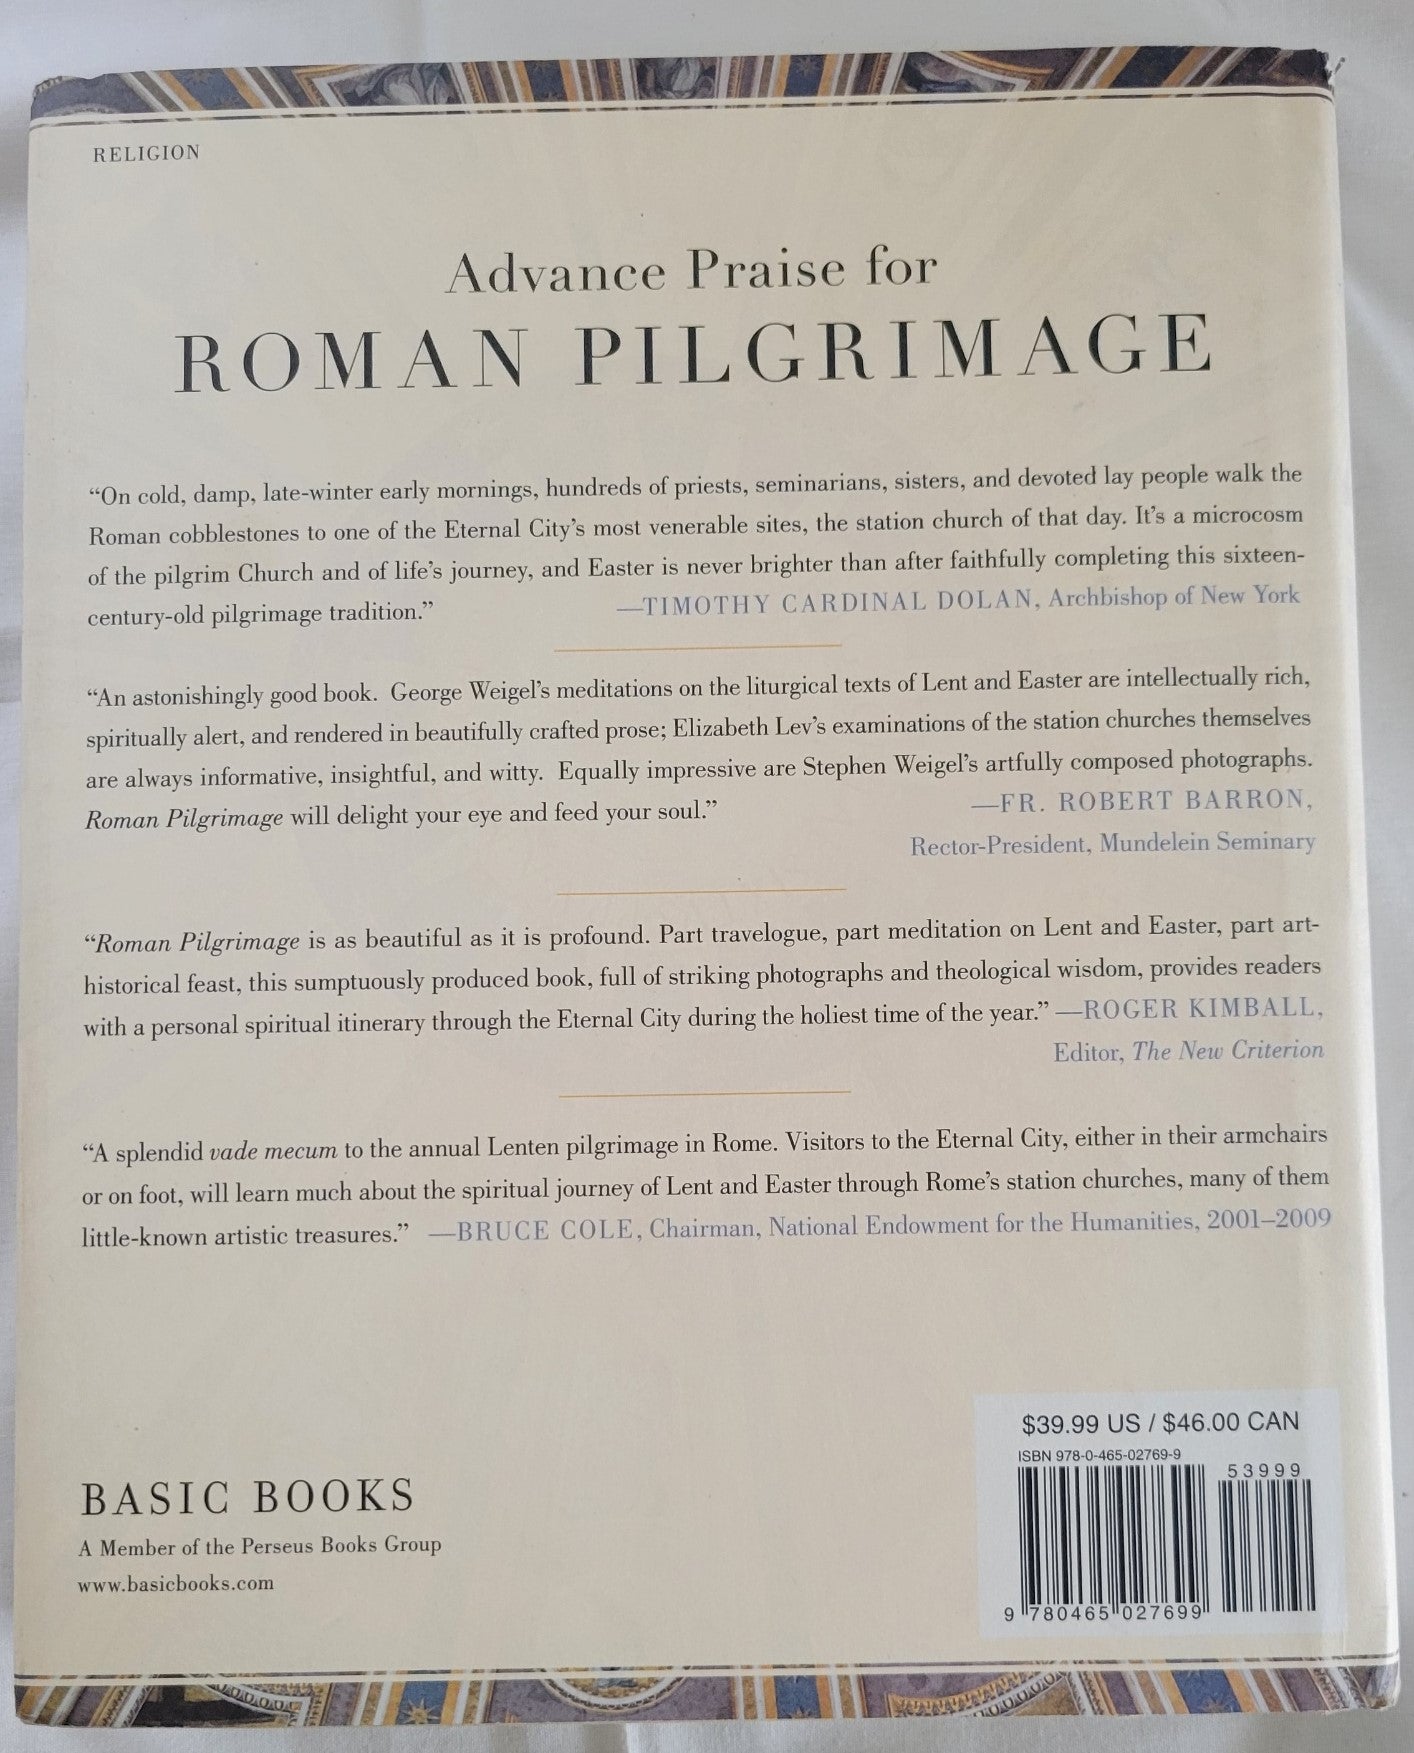 Used book for sale “Roman Pilgrimage: The Station Churches” by George Weigel with Elizabeth Lev and Stephen Weigel. View of back cover.